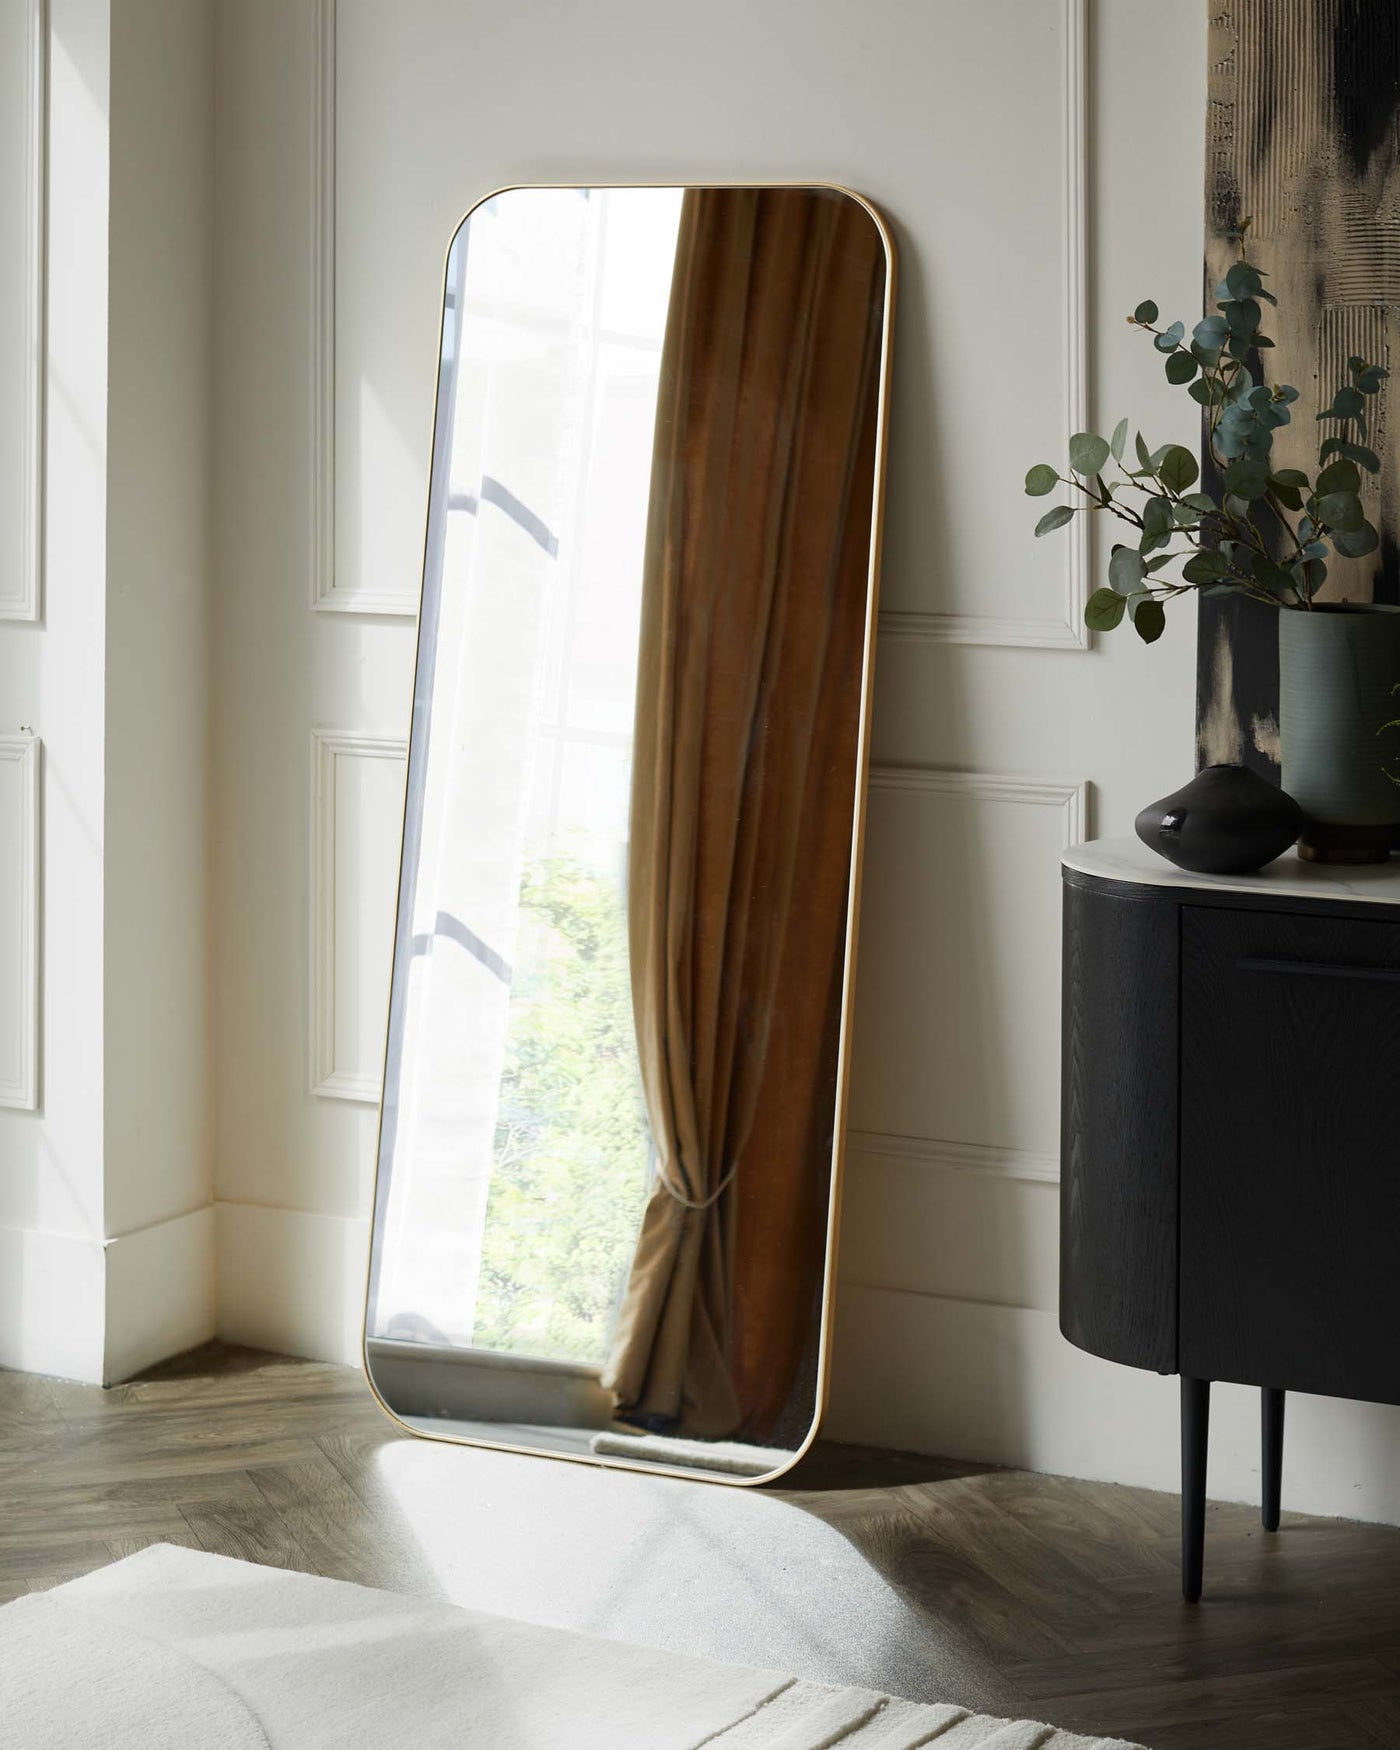 Large full-length floor mirror with a rounded top and brass-finished frame, alongside a dark-toned wooden sideboard with round tapered legs and sophisticated textured surface detailing.